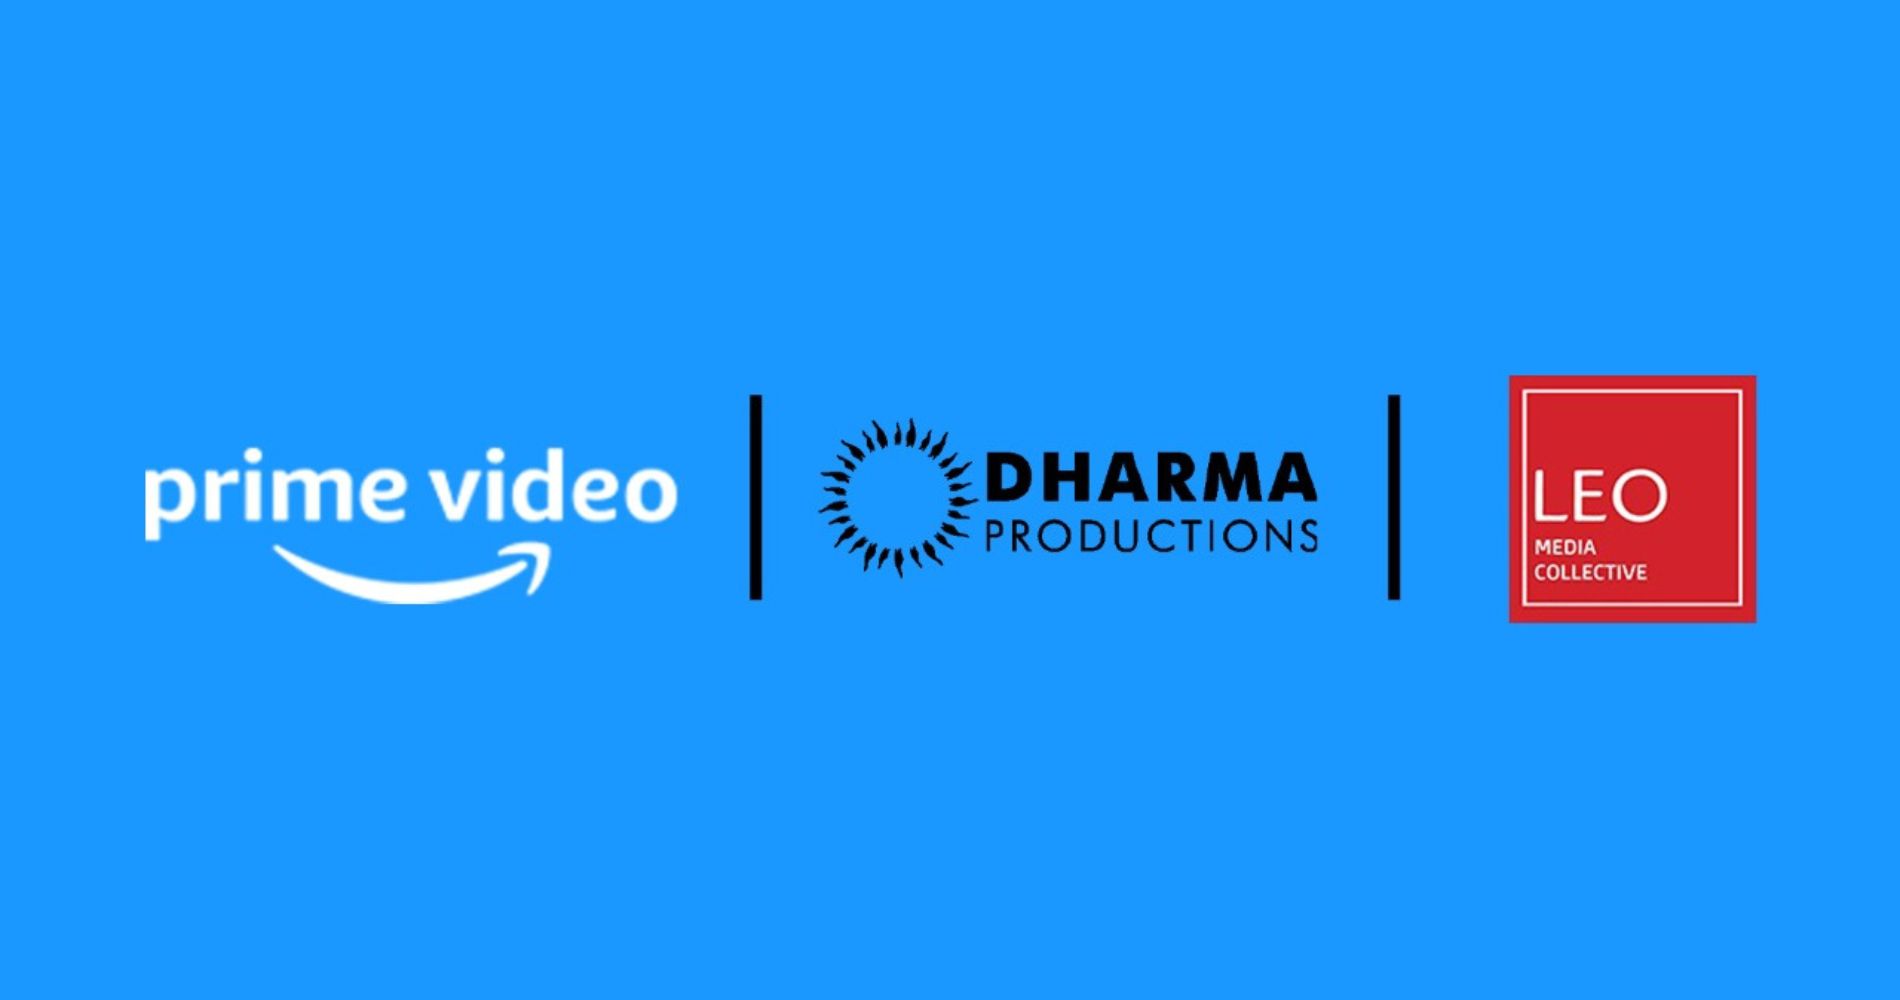 Prime Video announcing collaboration for theatrical release with Karan Johar’s Dharma Productions and Leo Media Collective